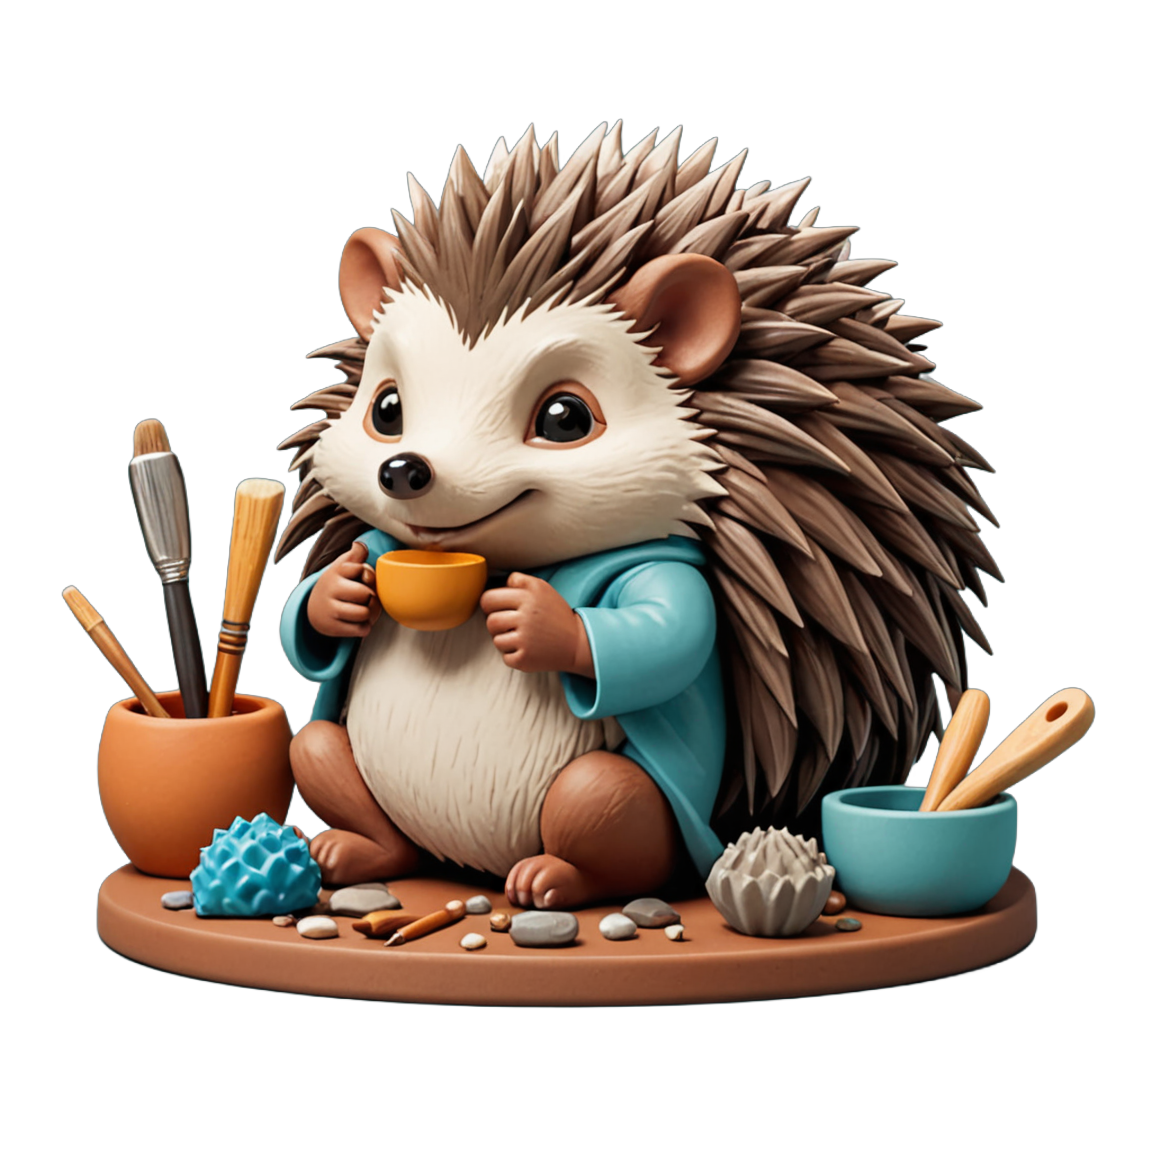 A hedgehog crafting pottery, surrounded by clay, its spines creatively studded with ceramic pieces and artisan tools